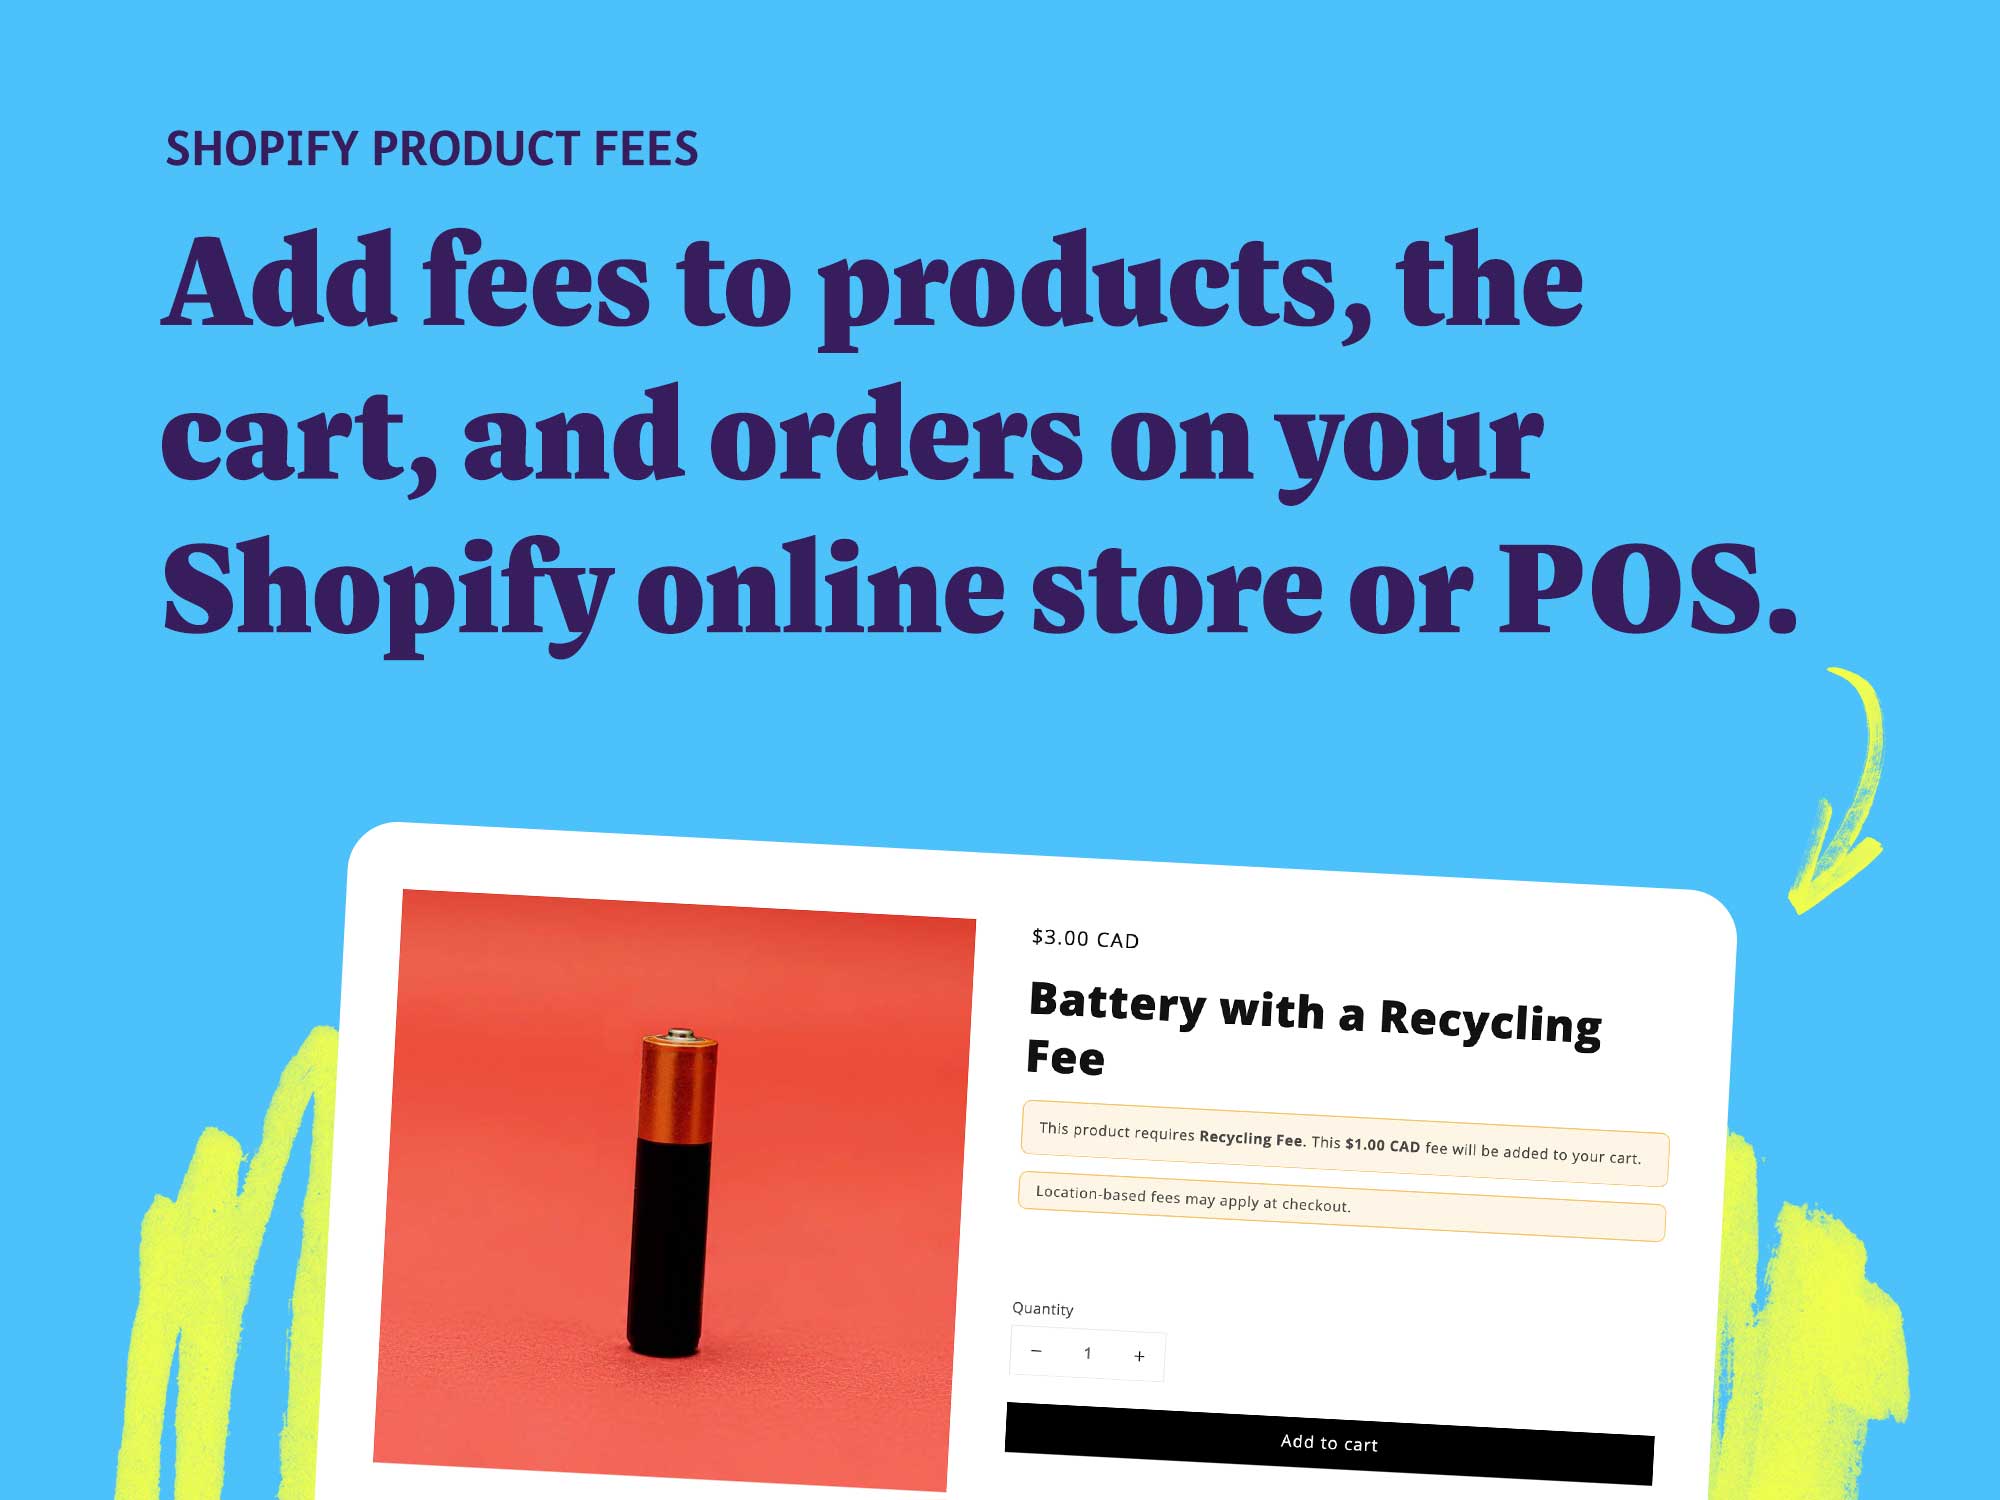 Shopify product fees: Add fees to products, the cart, and orders on your Shopify online store or POS.